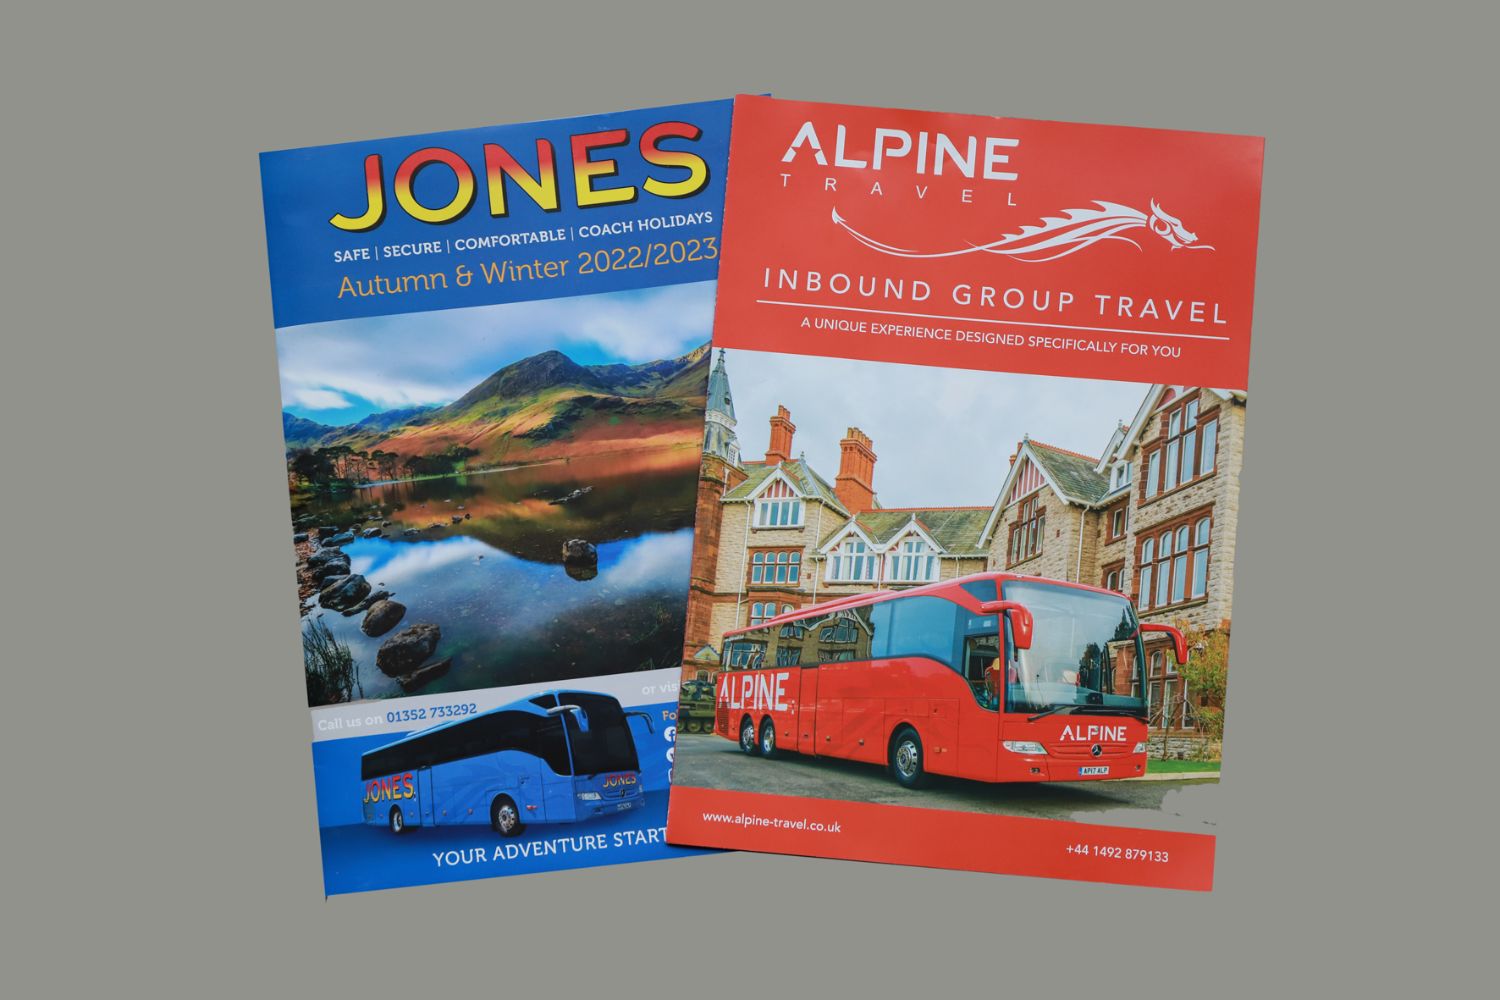 High quality brochures for Jones Holidays and Alpine Travel’s destination management activities in Wales